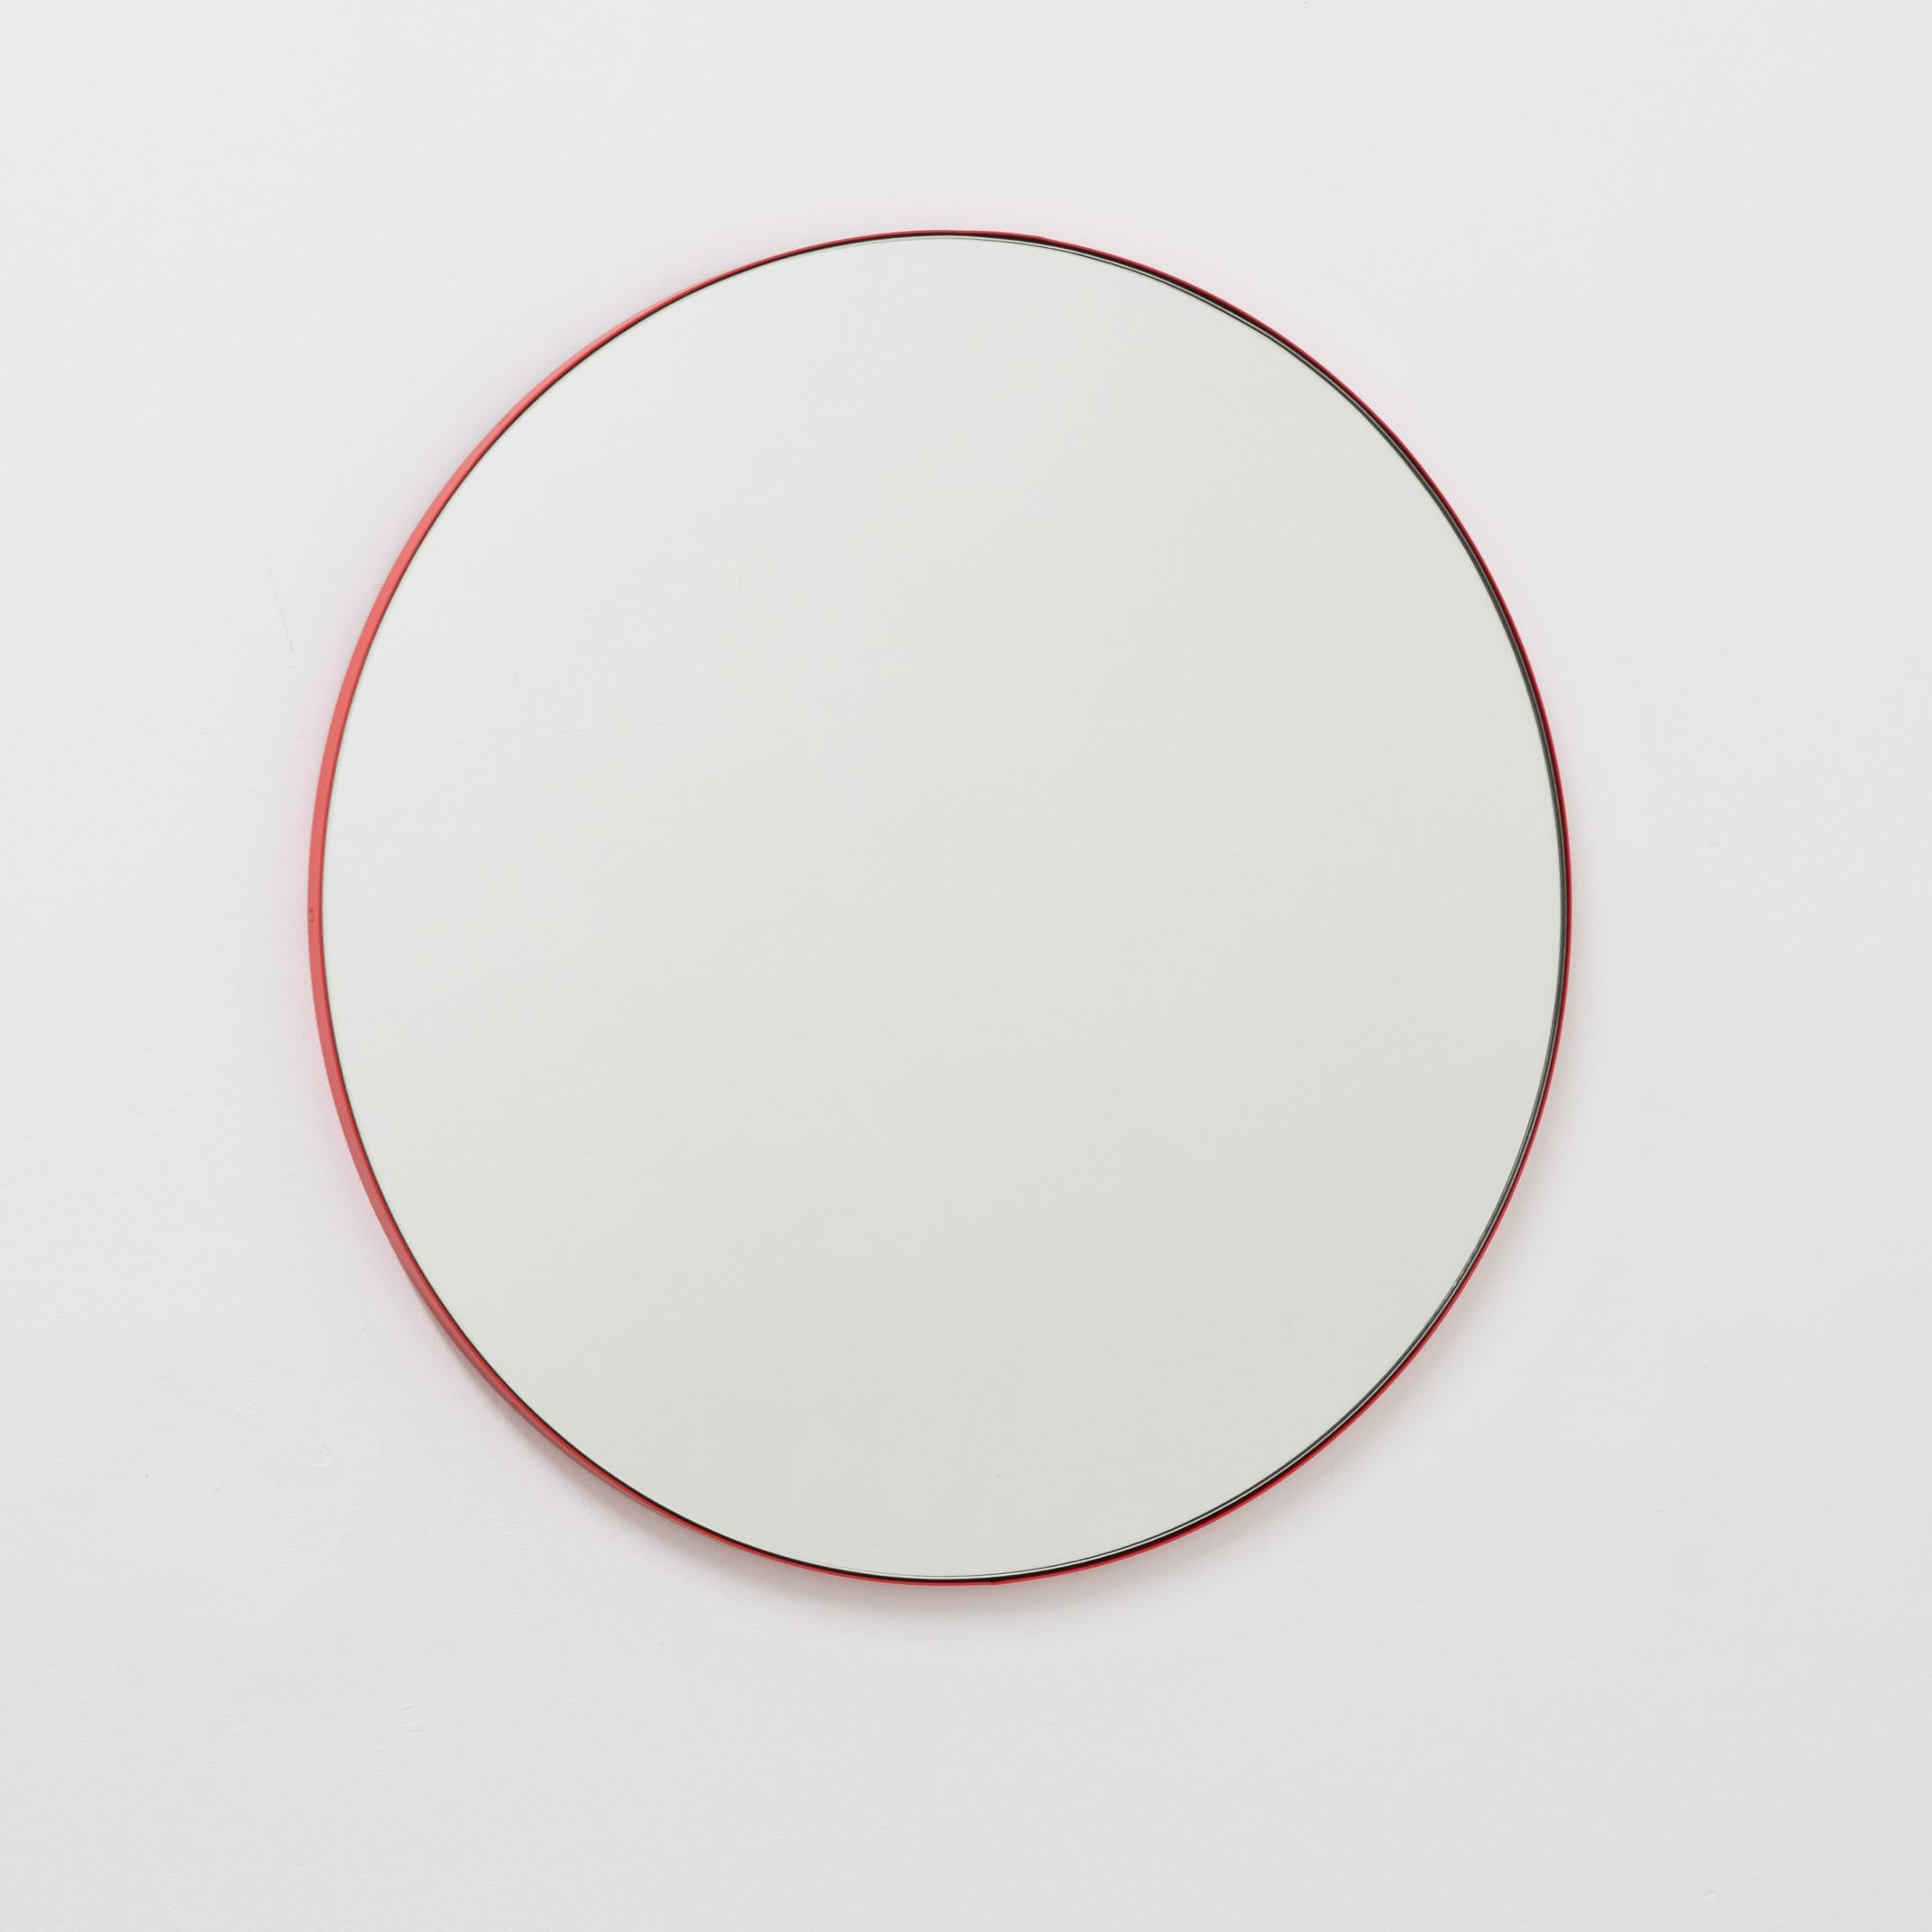 Orbis Round Minimalist Mirror with Red Frame, Medium In New Condition For Sale In London, GB